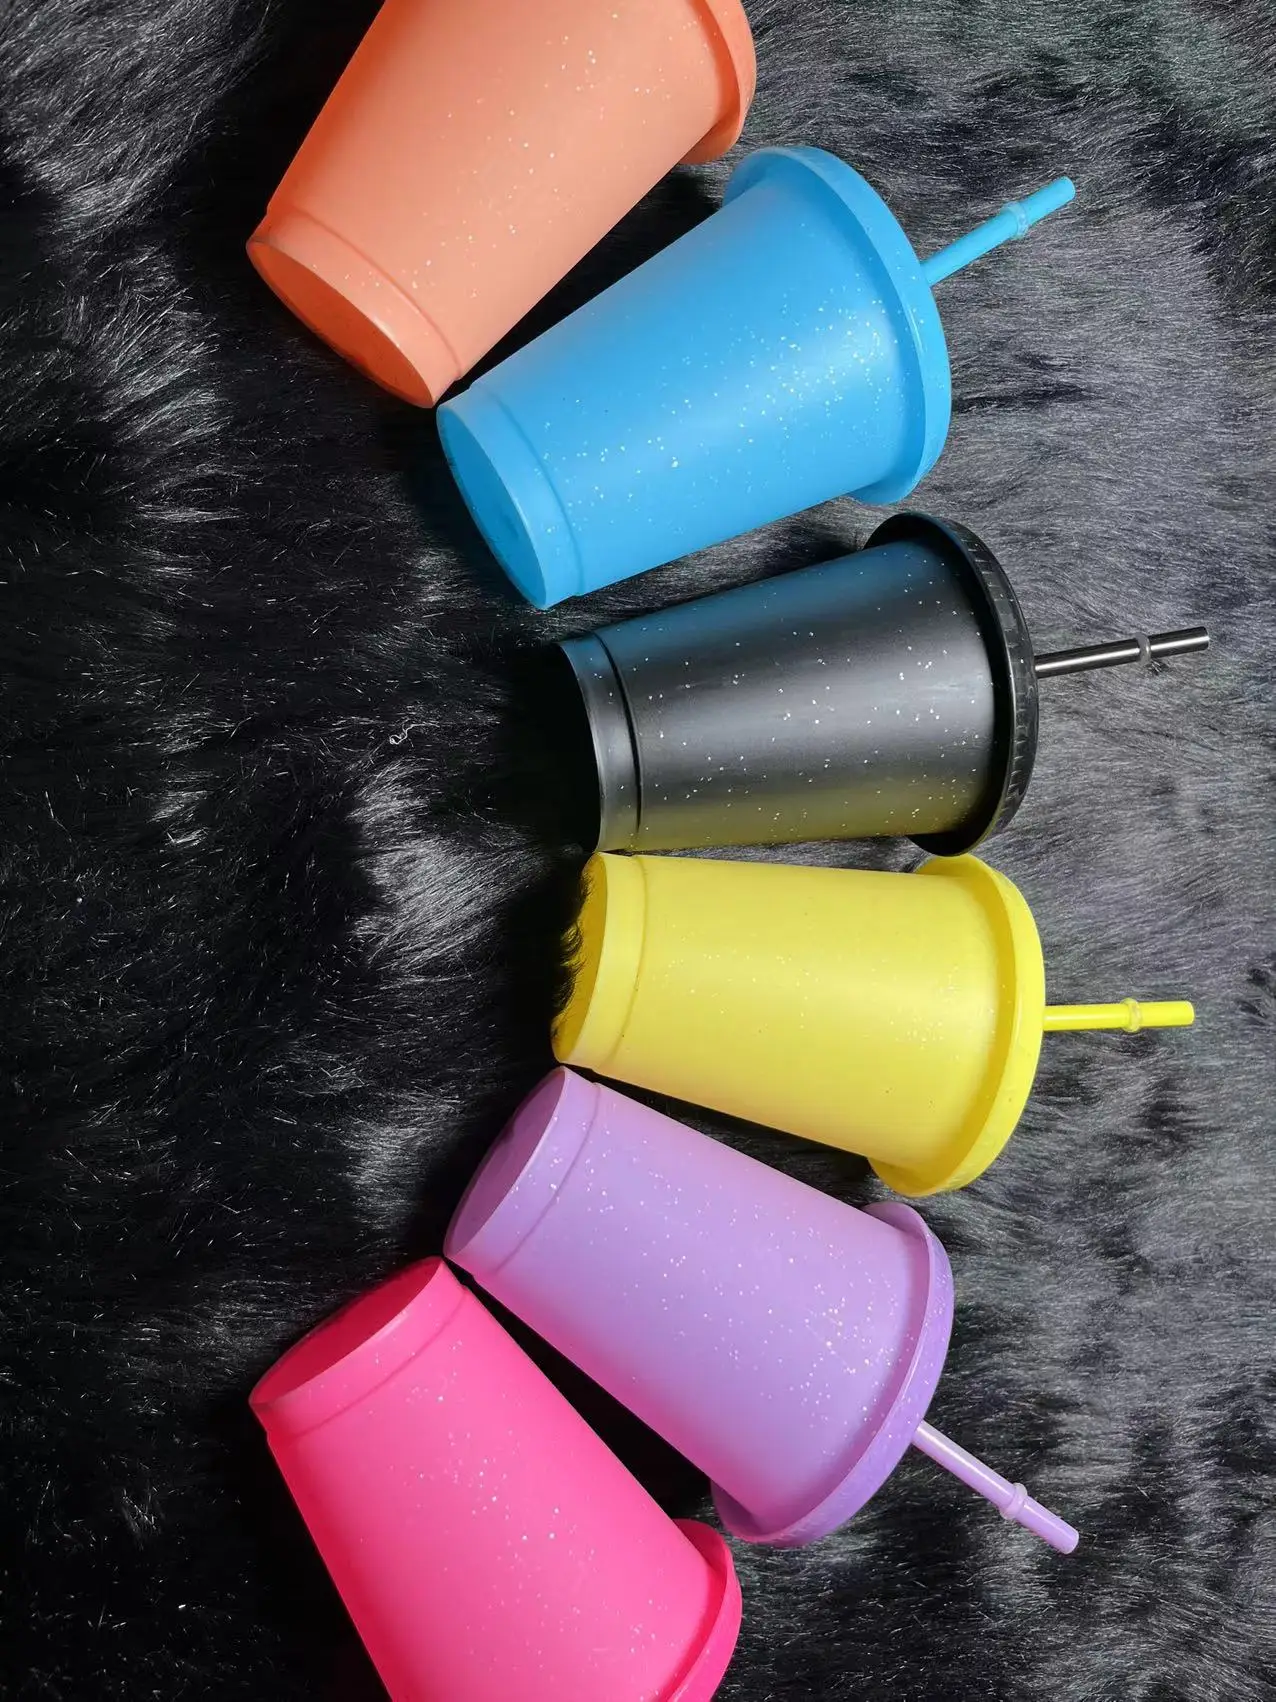 Coffee Cup Reusable Cups Plastic  Reusable Plastic Cups Blank - Free 473ml  480ml - Aliexpress